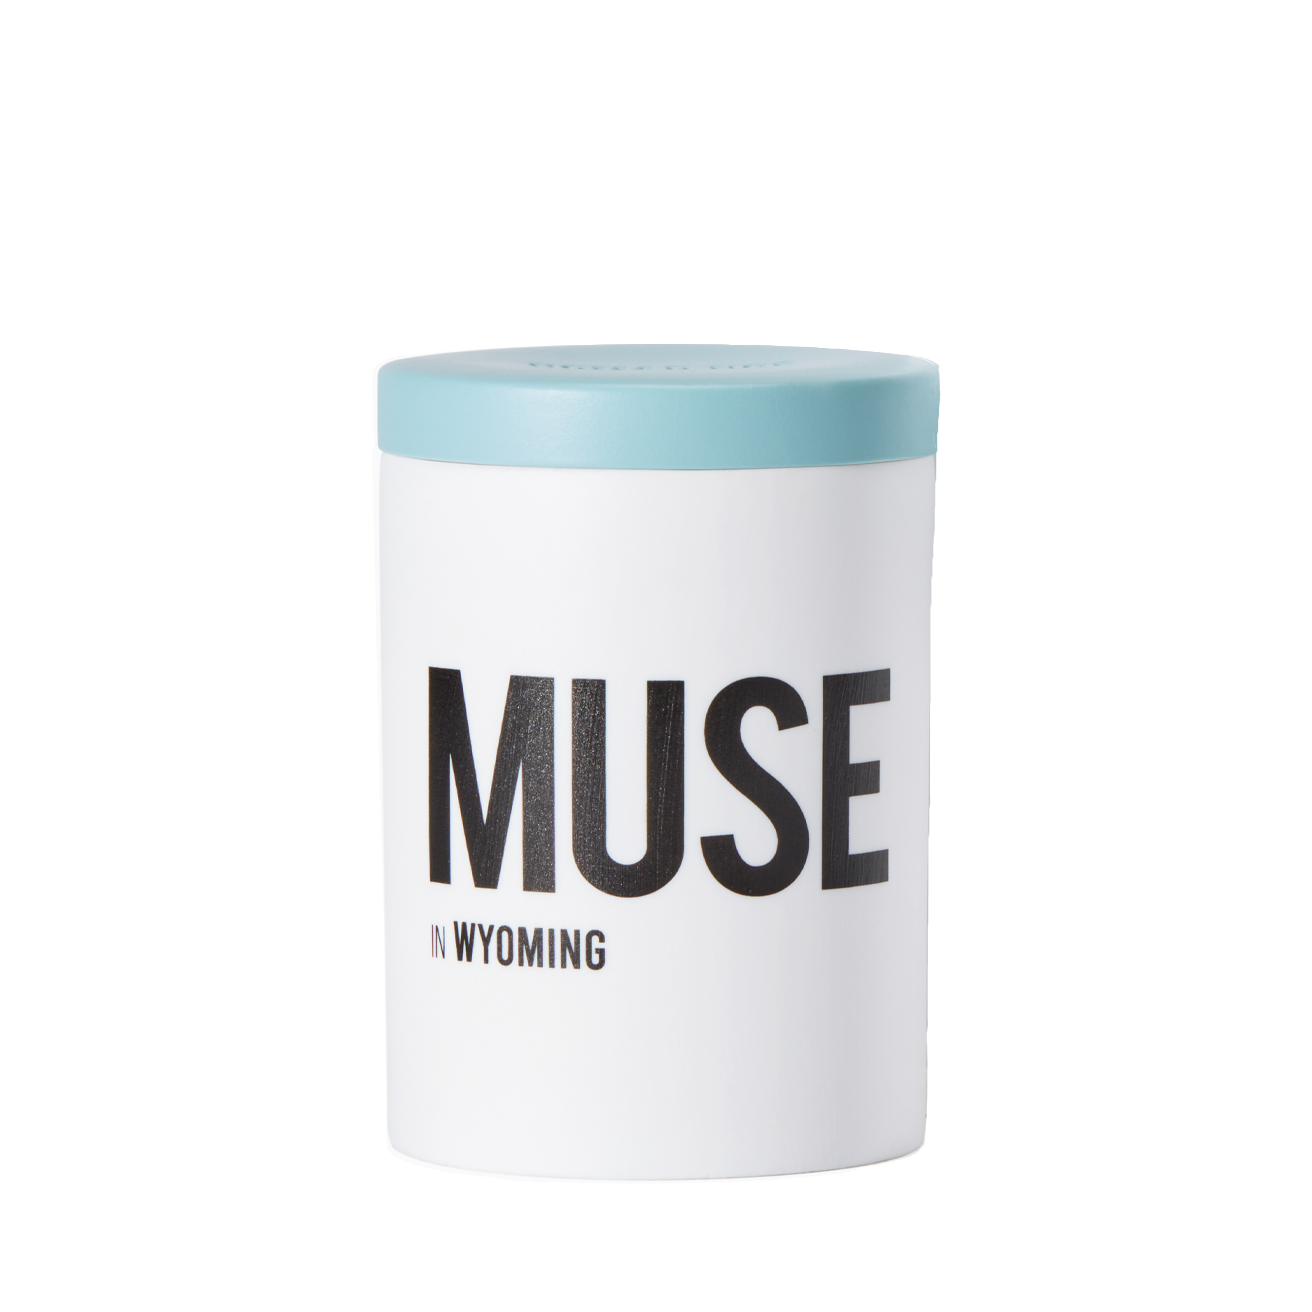 nomad noé muse in wyoming candle